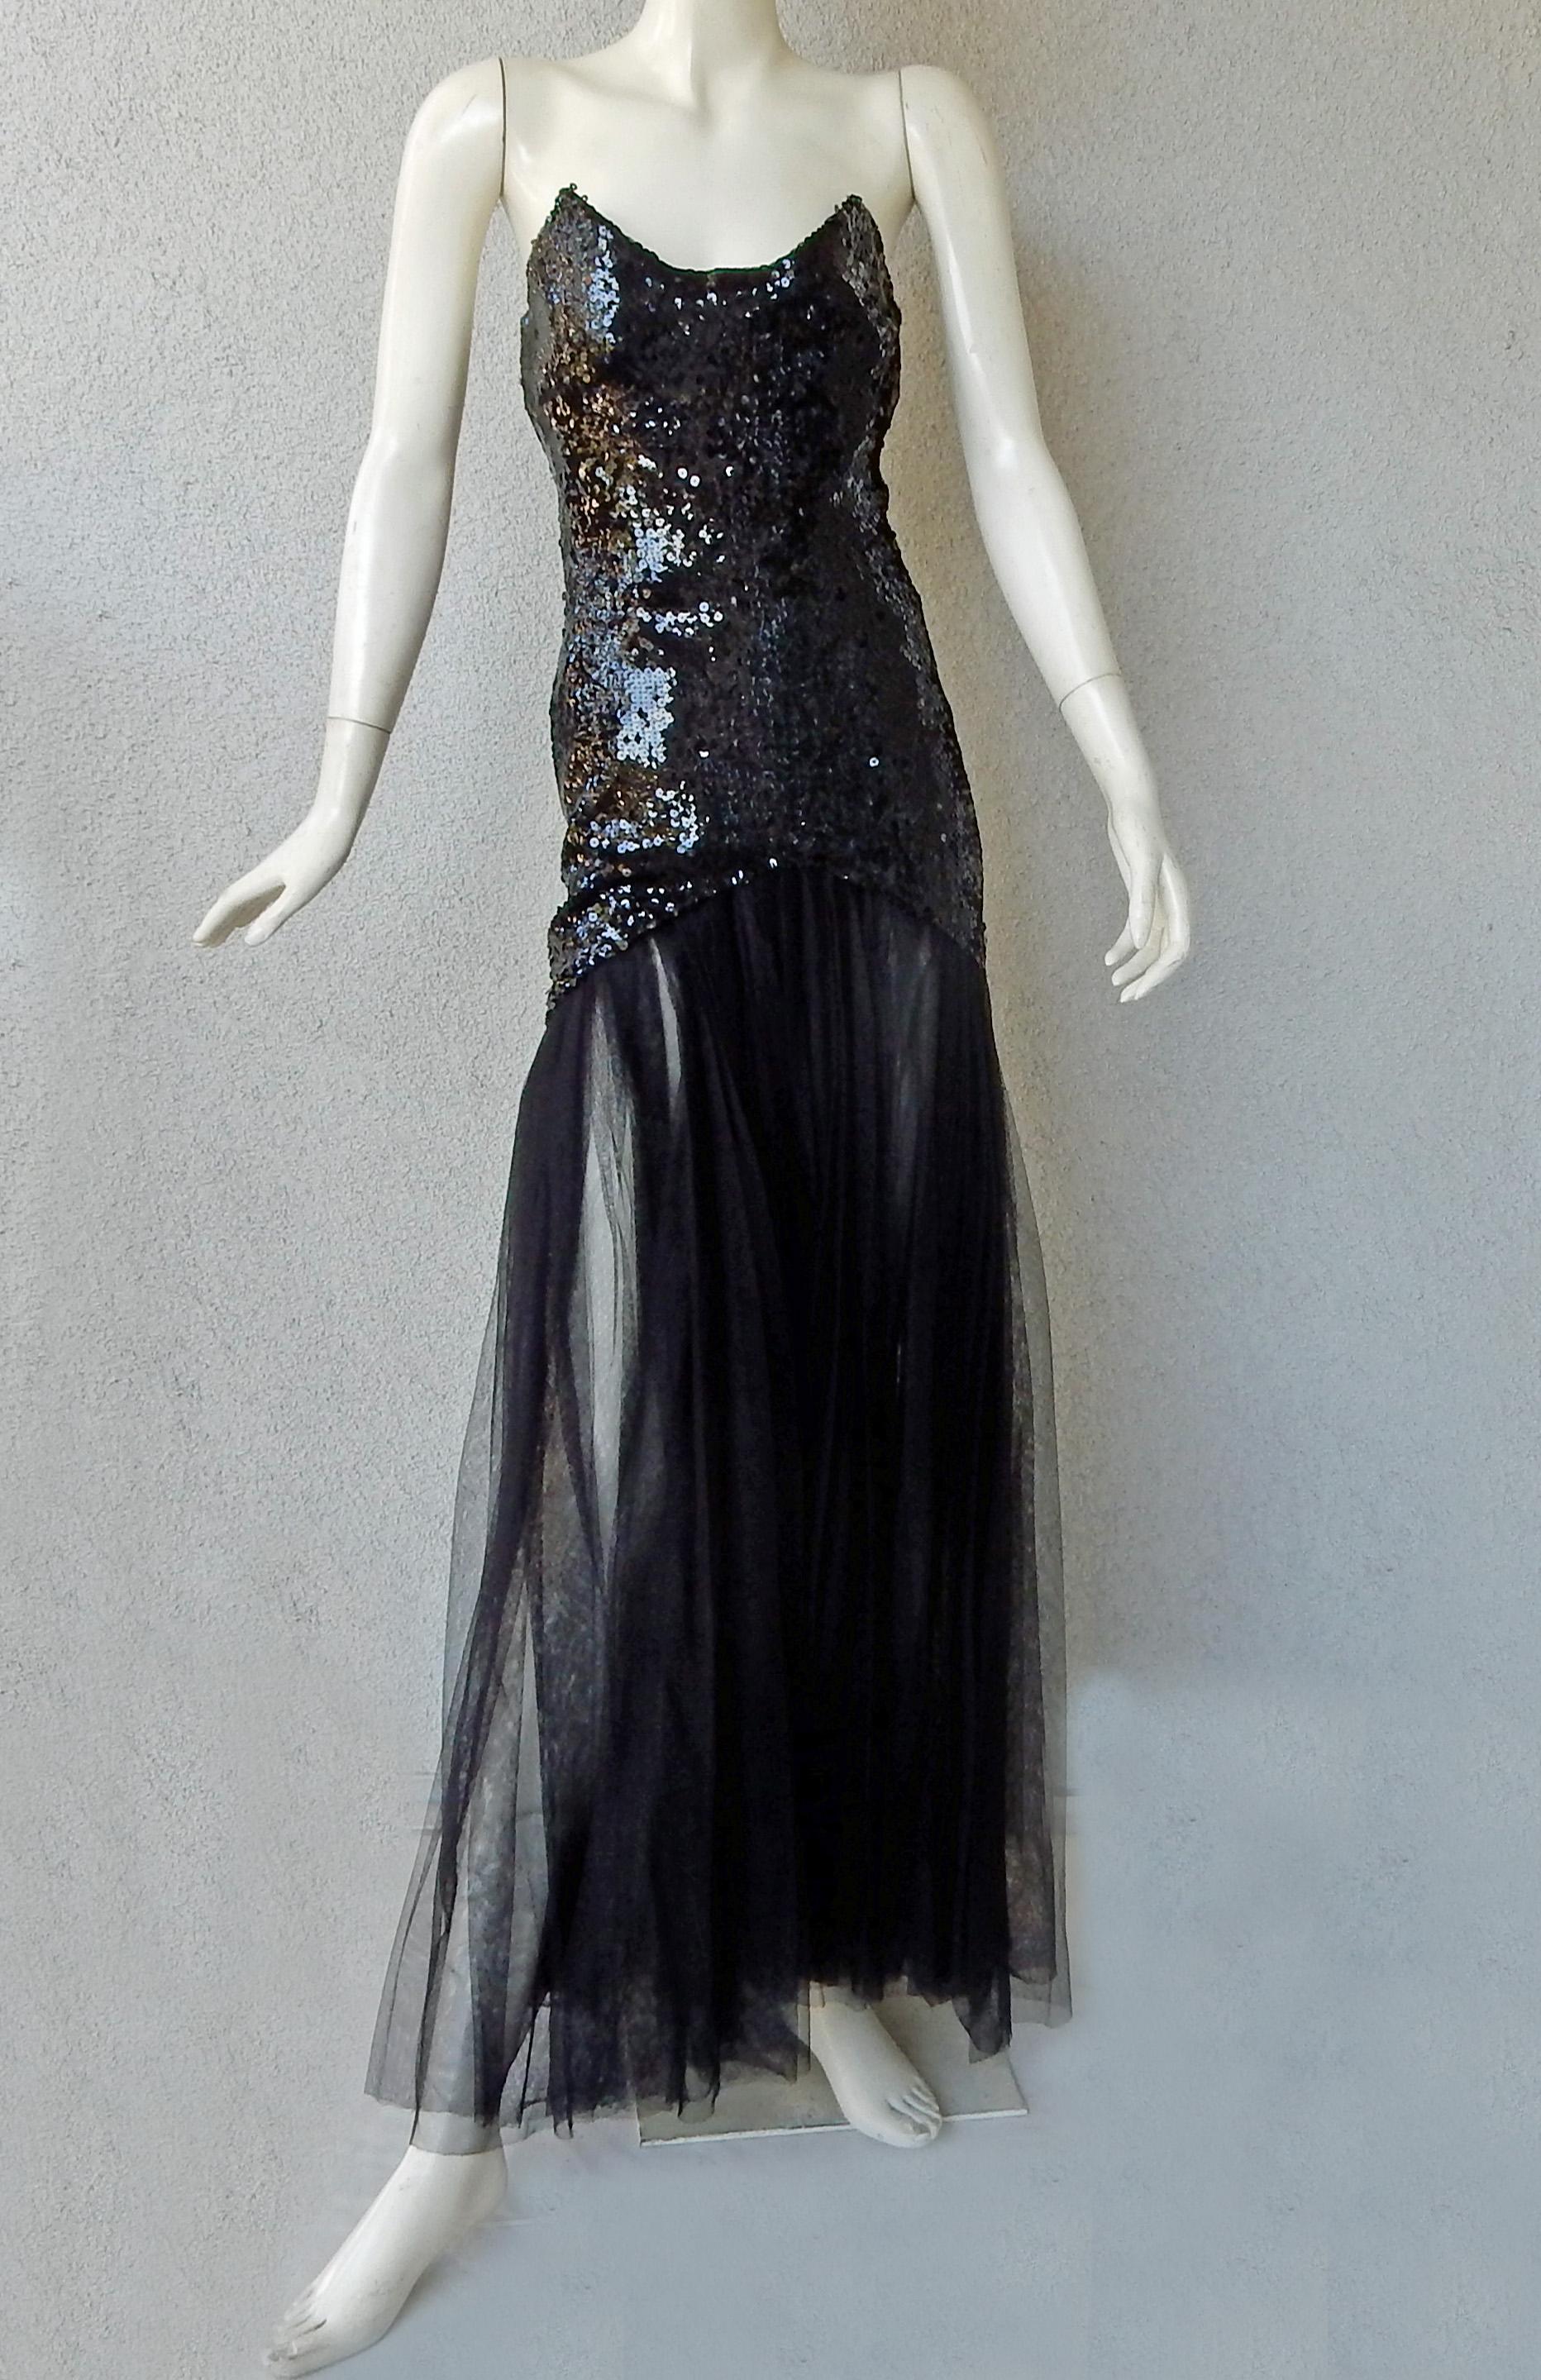 Rare mid 90's Thierry Mugler strapless mermaid style evening gown with elongated bodice of handsewn black paillettes and skirt fashioned of layers of black chiffon.  Lined.  A very dramatic look and the essence of the designer's work. Fully lined;